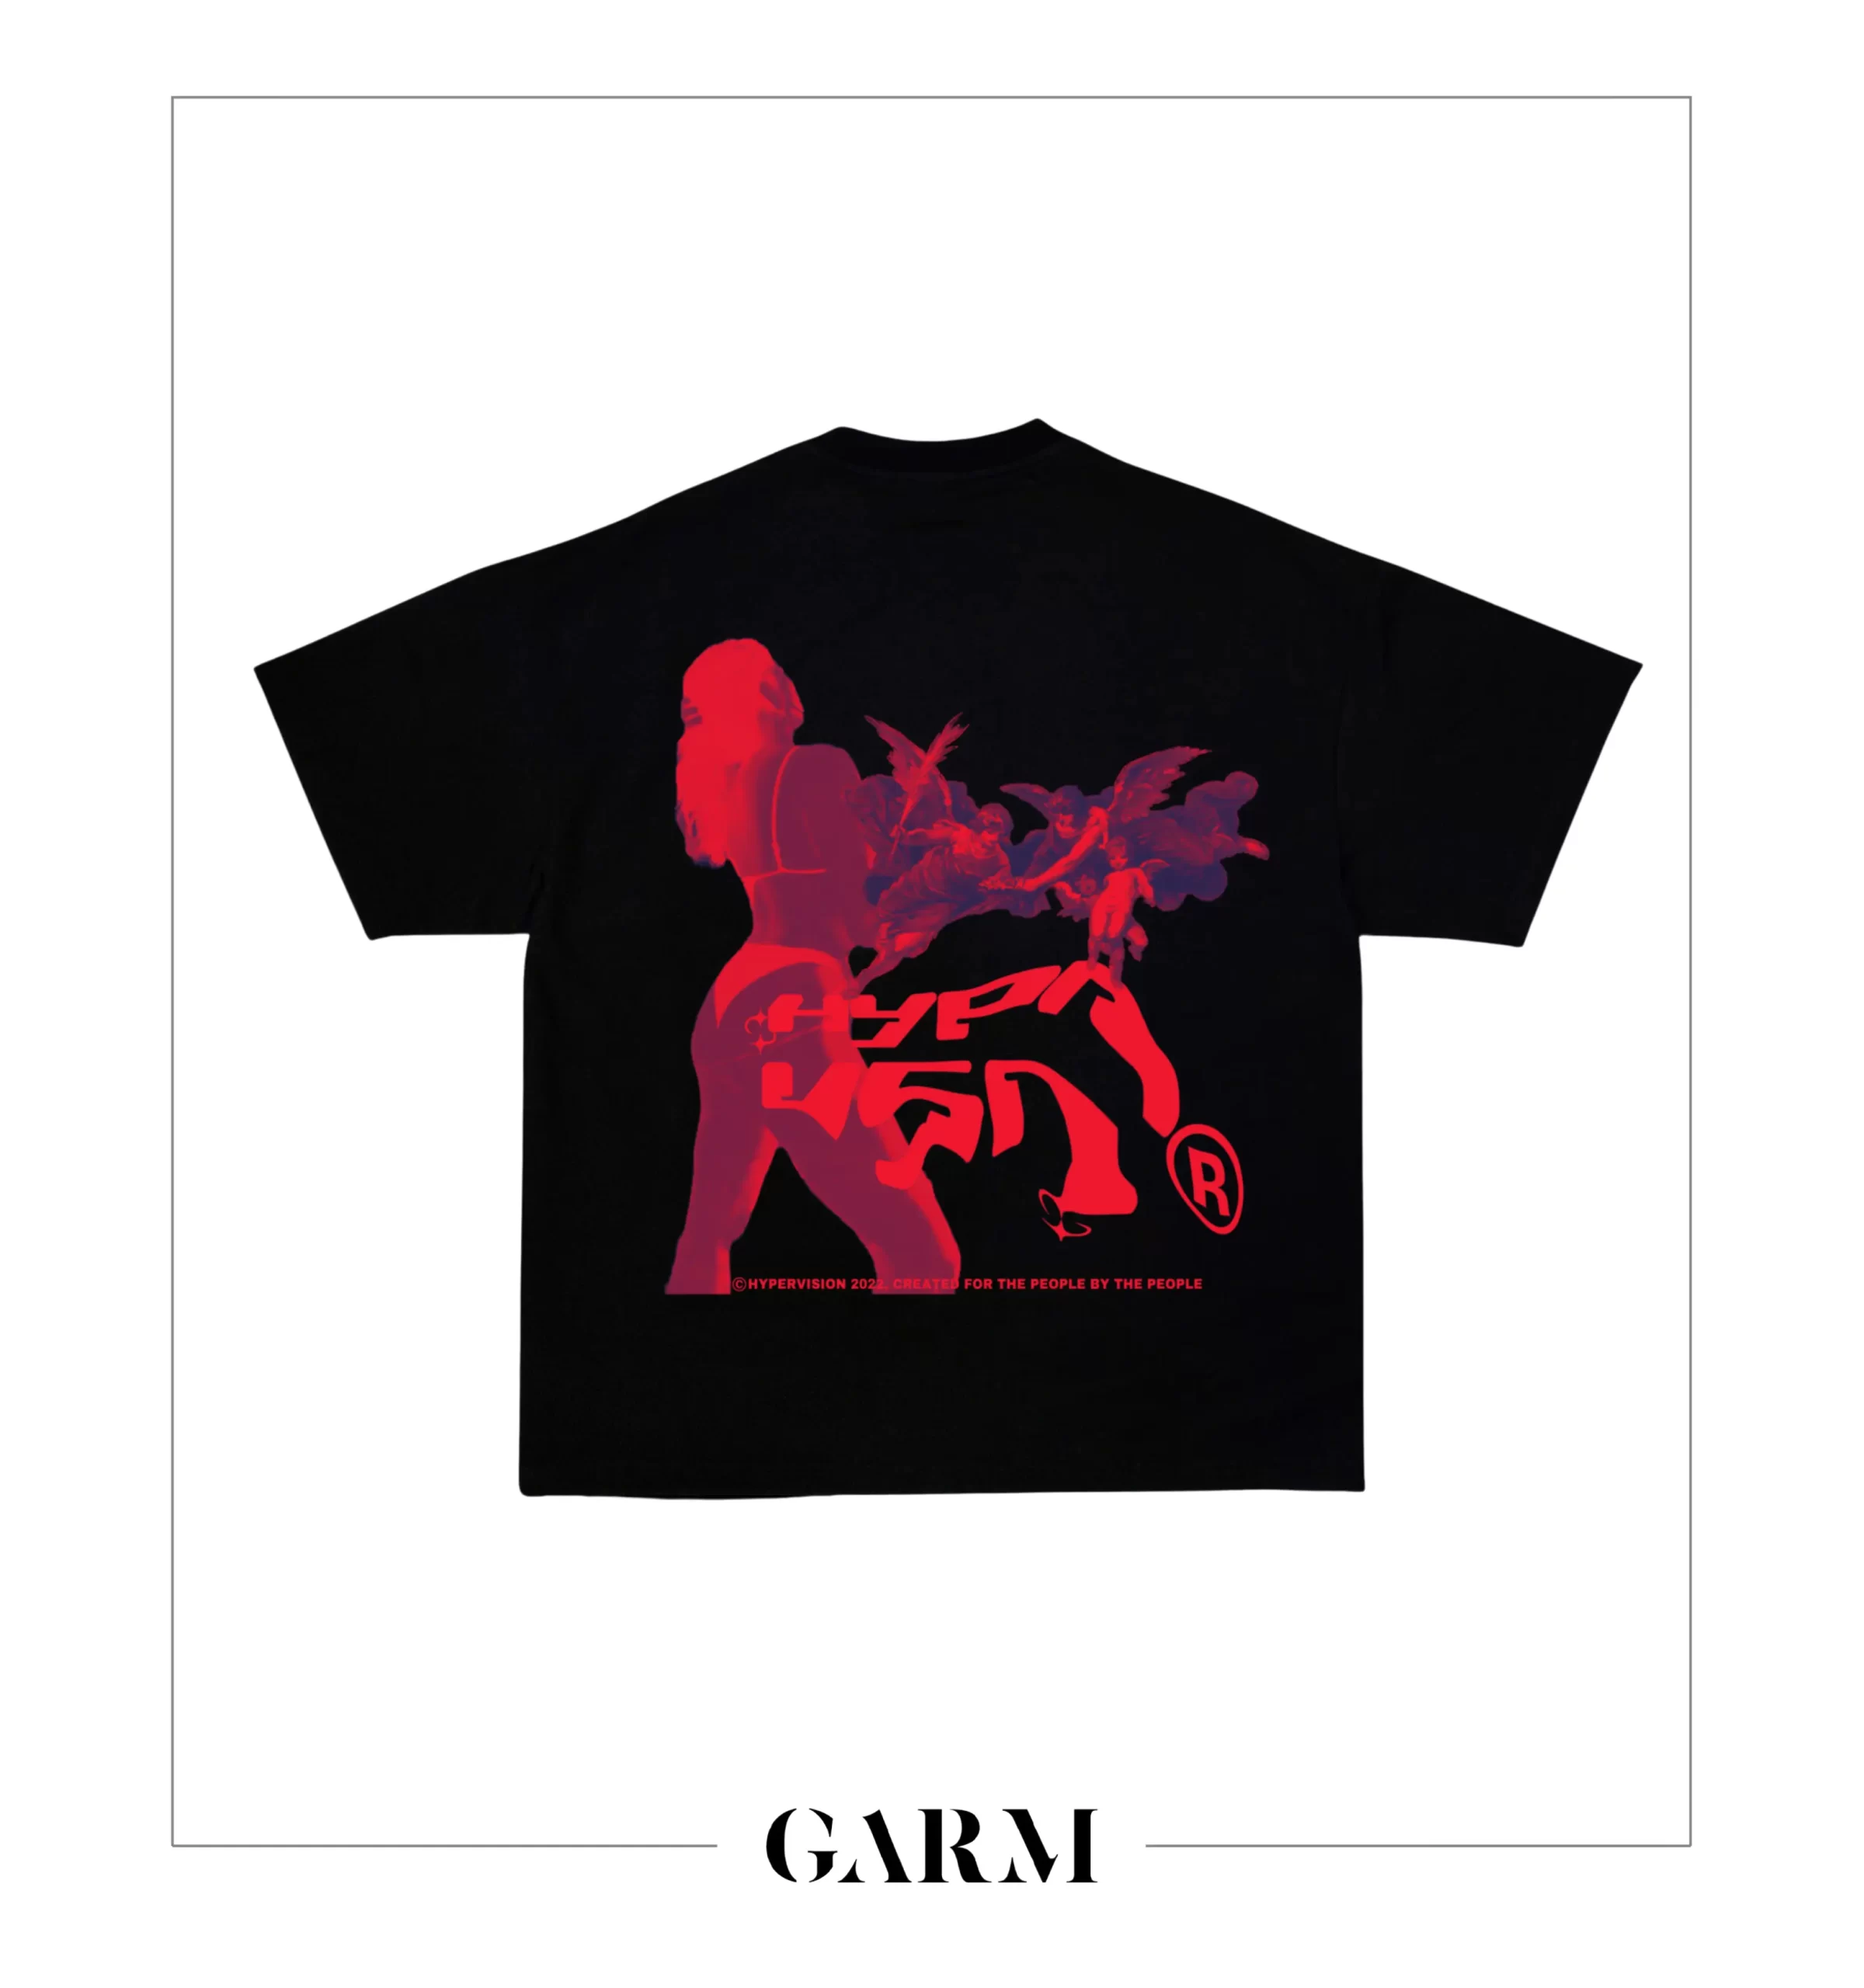 SCARLET VSN T-shirt by Hypervision available on Garm